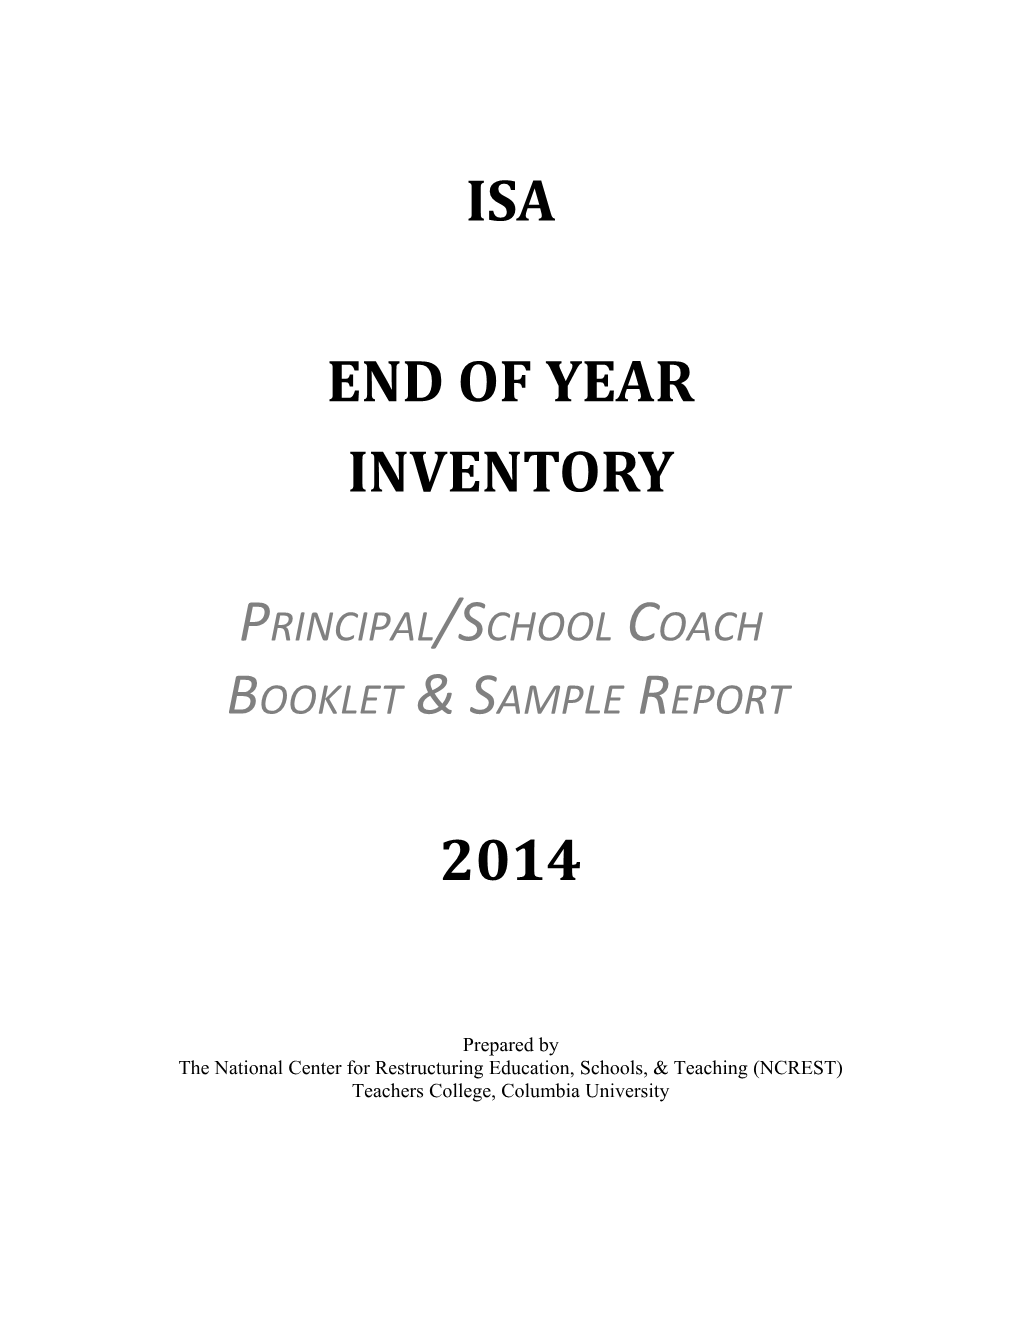 ISA Annual End of Year Inventory